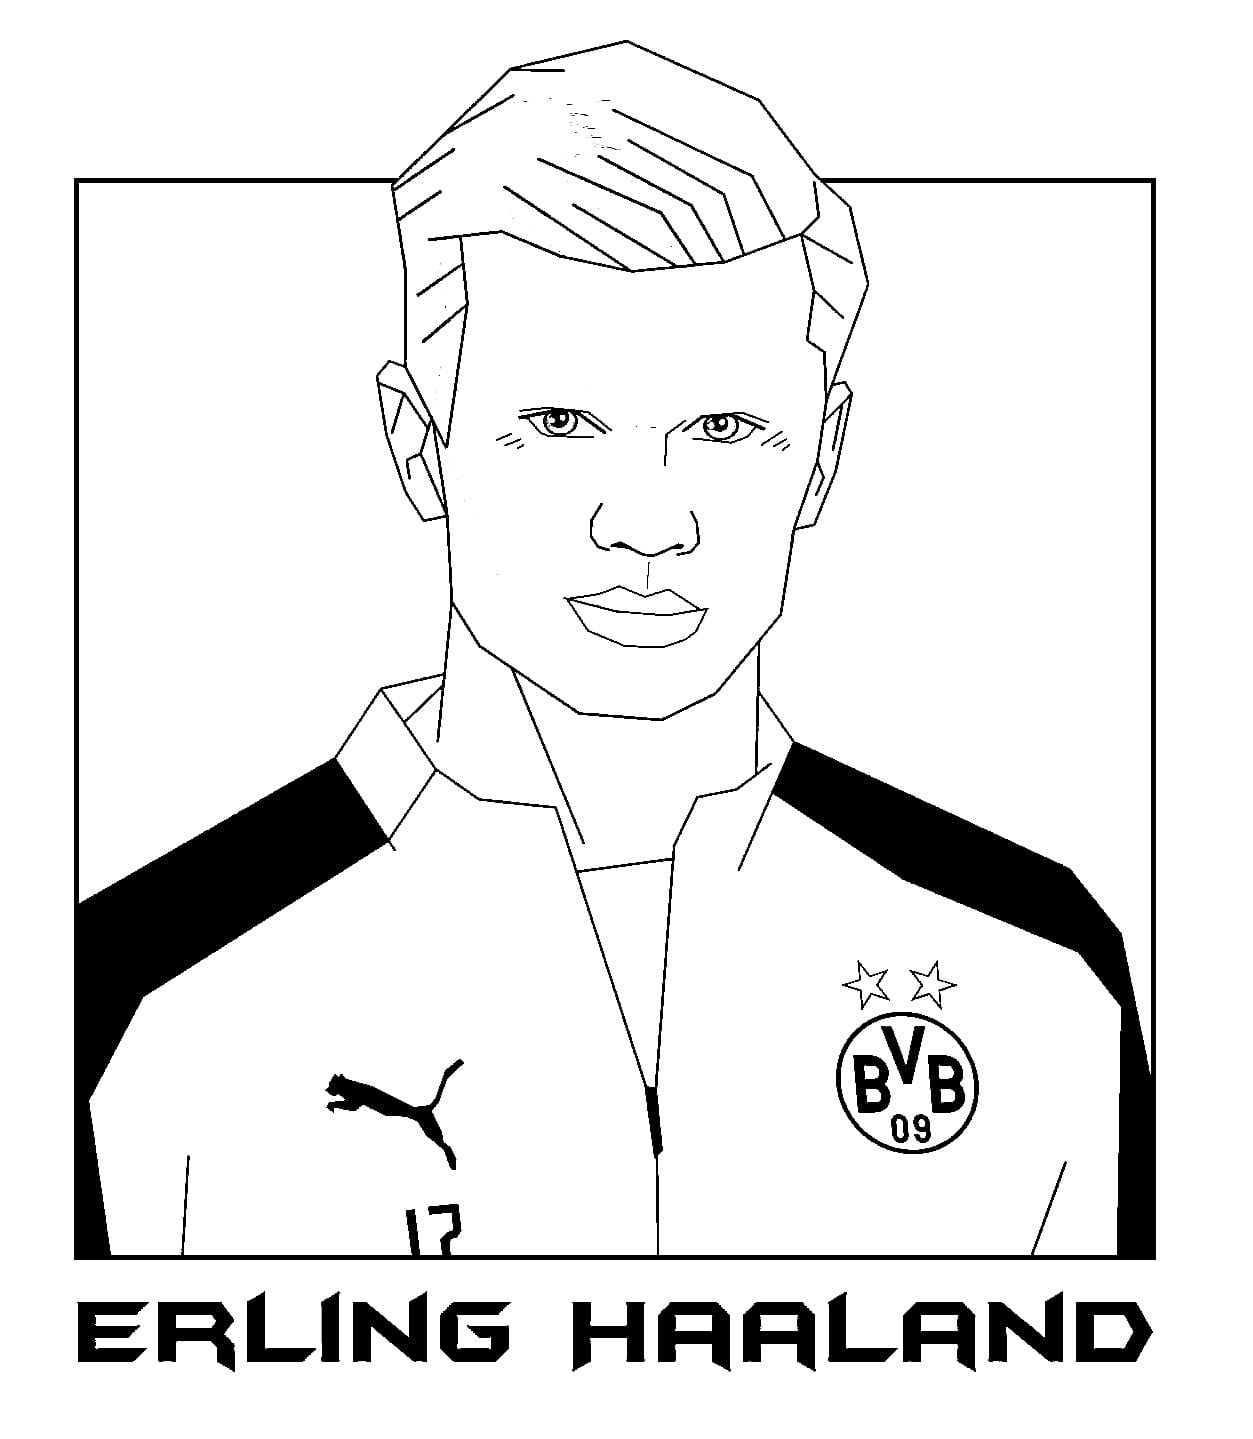 Erling Haaland Sketch Coloring Page - Free Printable Coloring Pages for ...